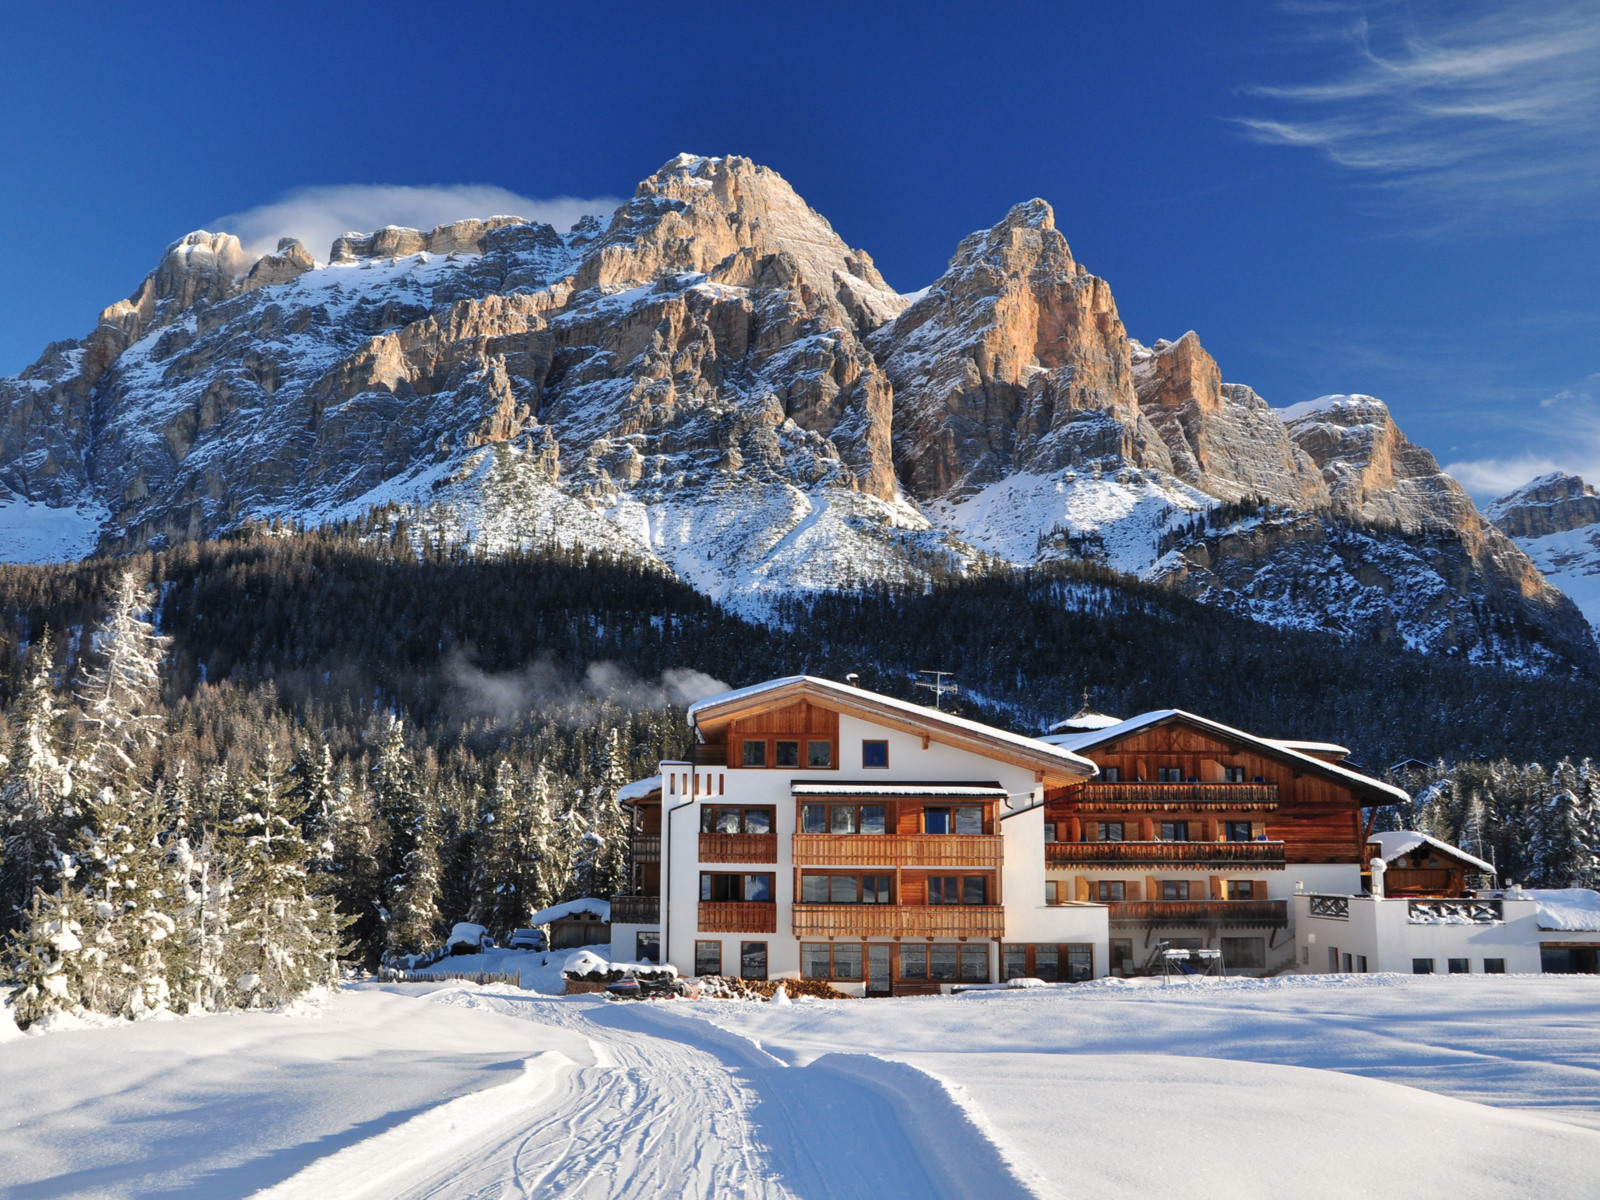 San Cassiano, one of the best places to visit in Italy, pictured in the Winter